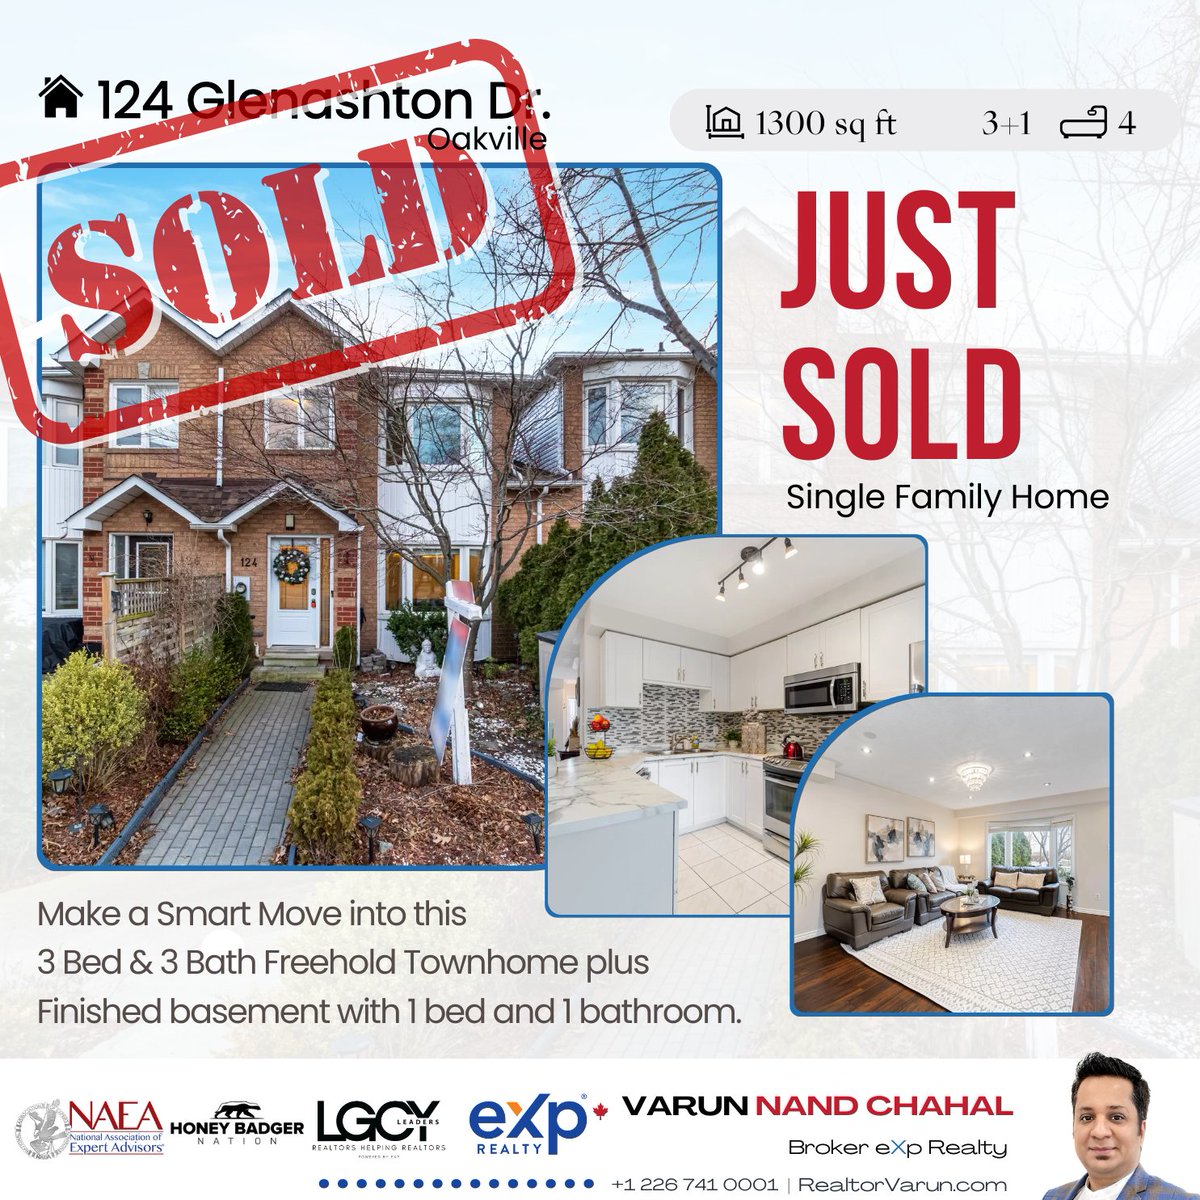 JUST SOLD!  
Congratulations to the new owners of this charming single-family home at 124 Glenashton Dr. Oakville! 

#justsold #sold #oakville #homebuyers #homeowners #RealtorVarunNandChahal #VarunNandChahal